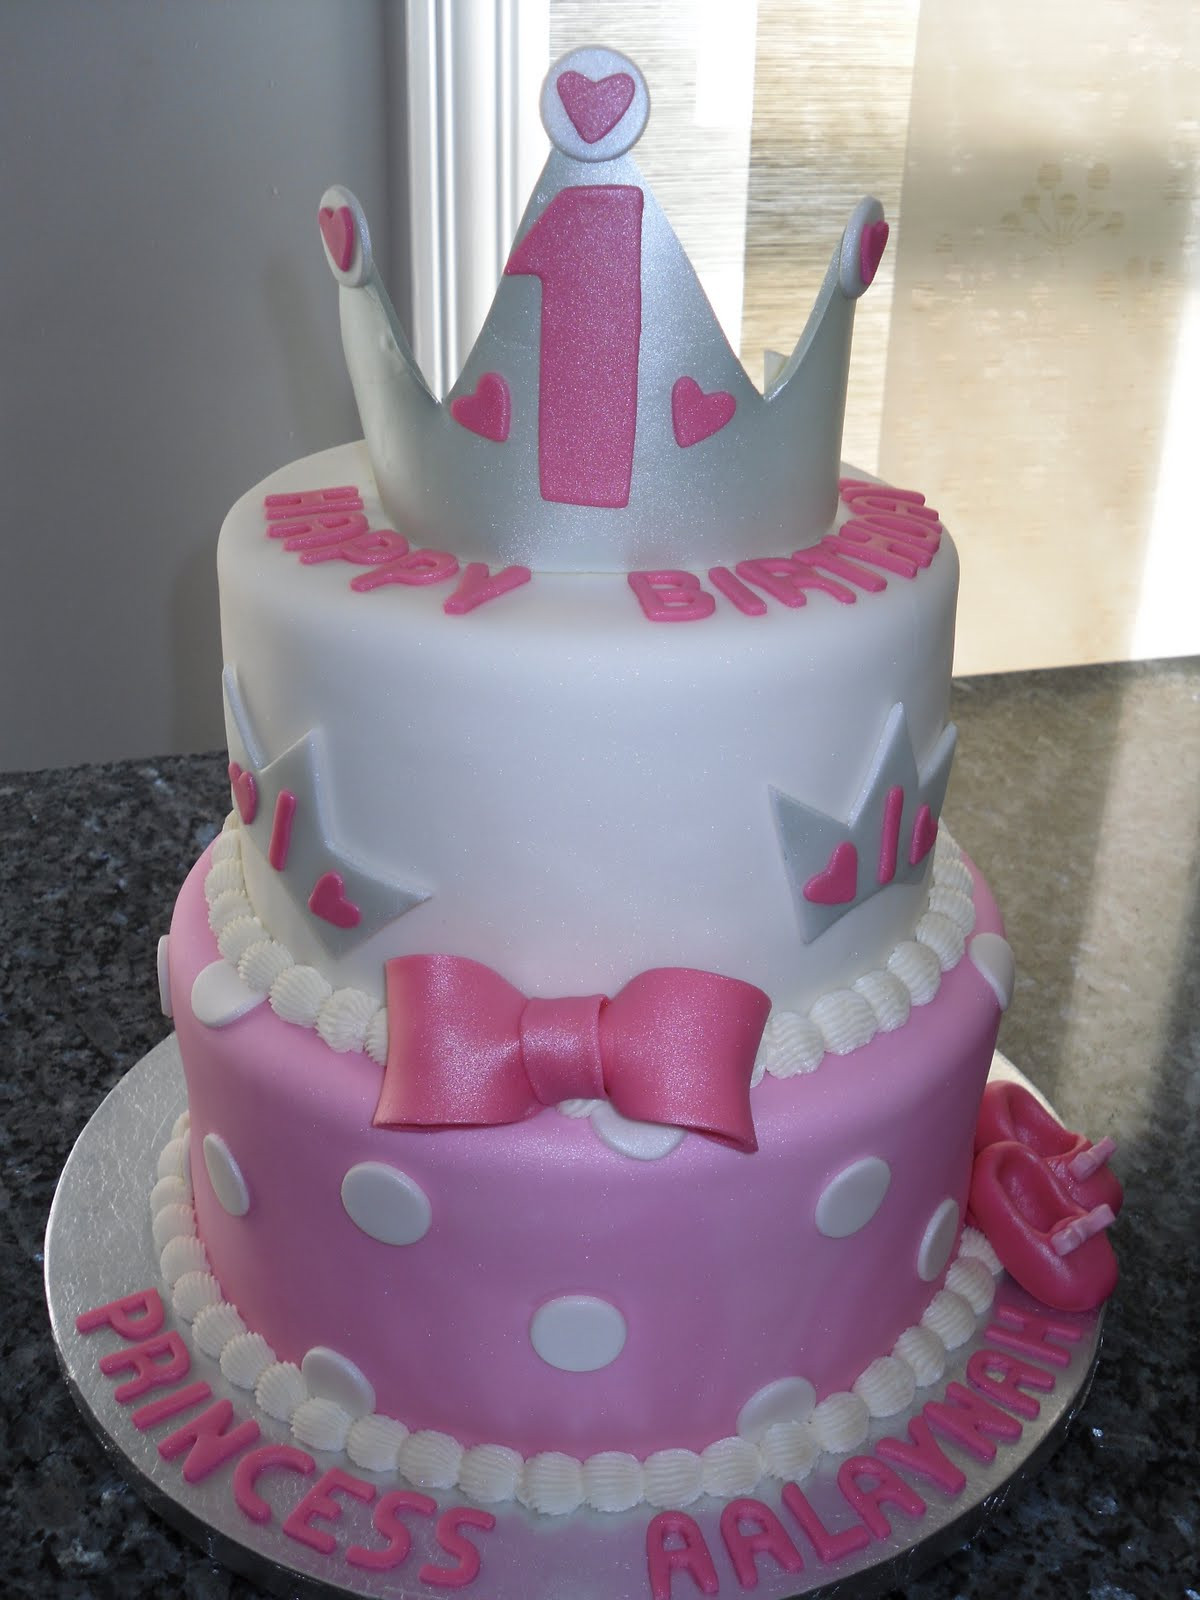 One Year Birthday Cake
 Carat Cakes Two Very Special e Year Old Birthdays